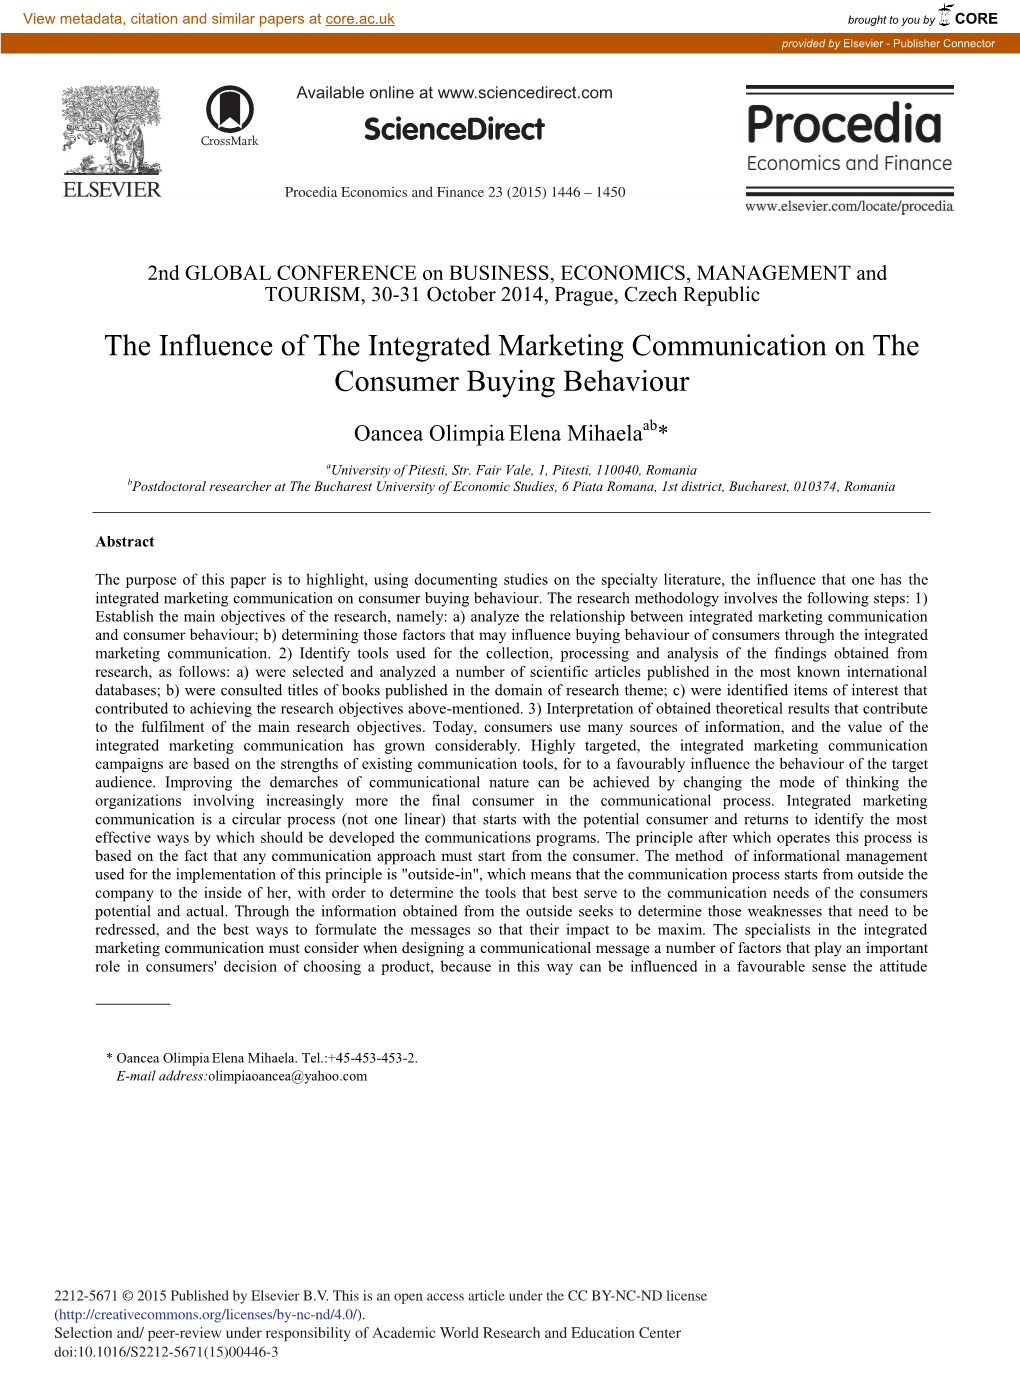 The Influence of the Integrated Marketing Communication on the Consumer Buying Behaviour